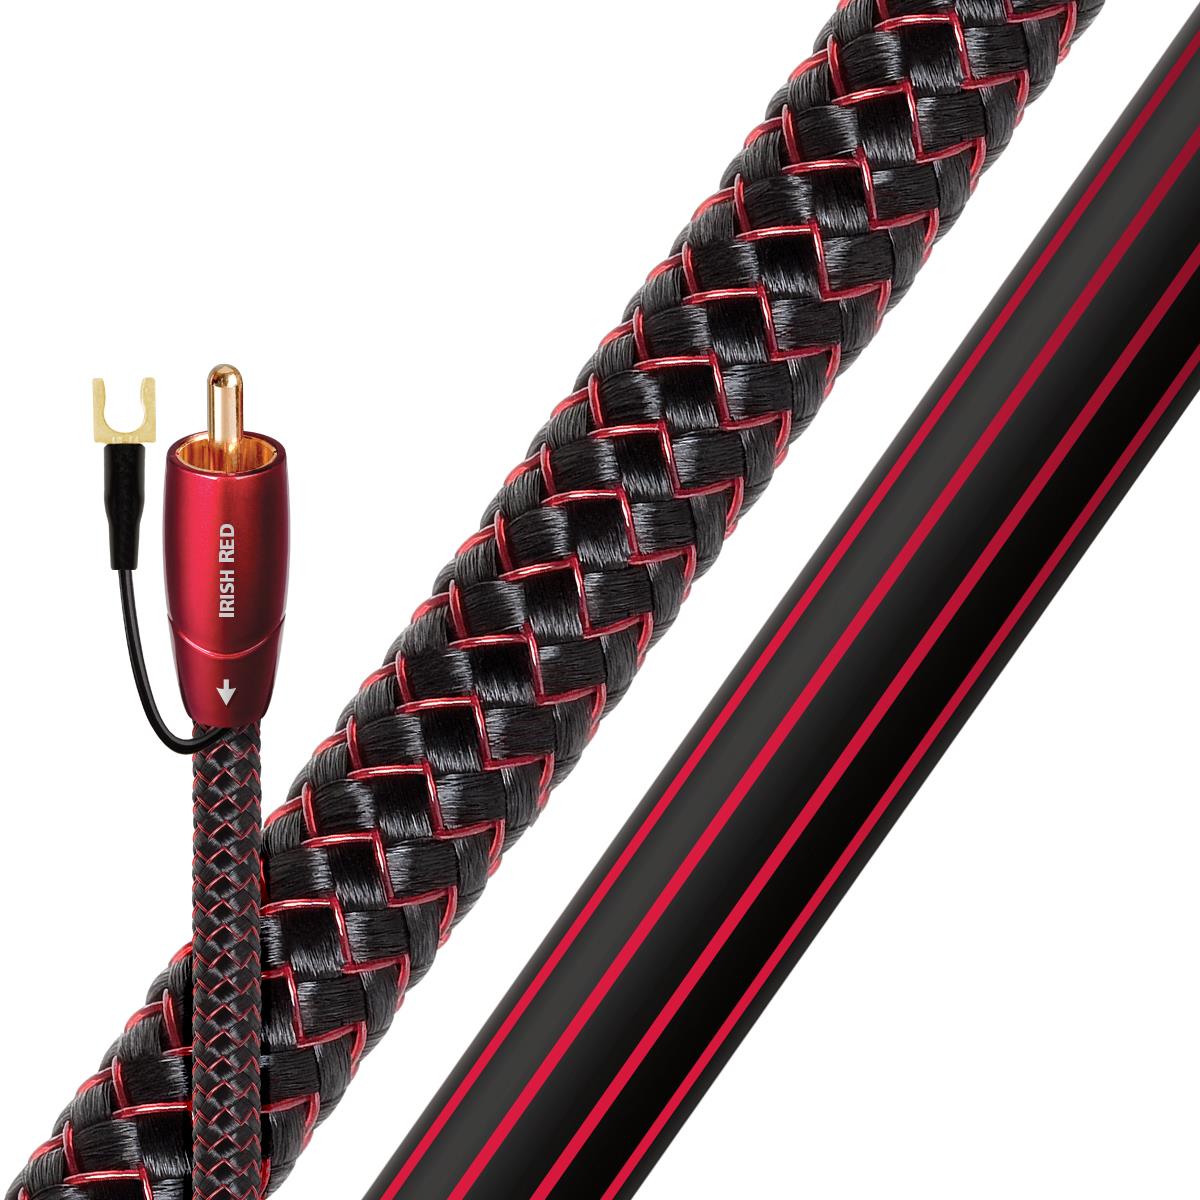 AudioQuest Irish Red RCA Male to RCA Male Subwoofer Cable - 9.84 ft. (3m)